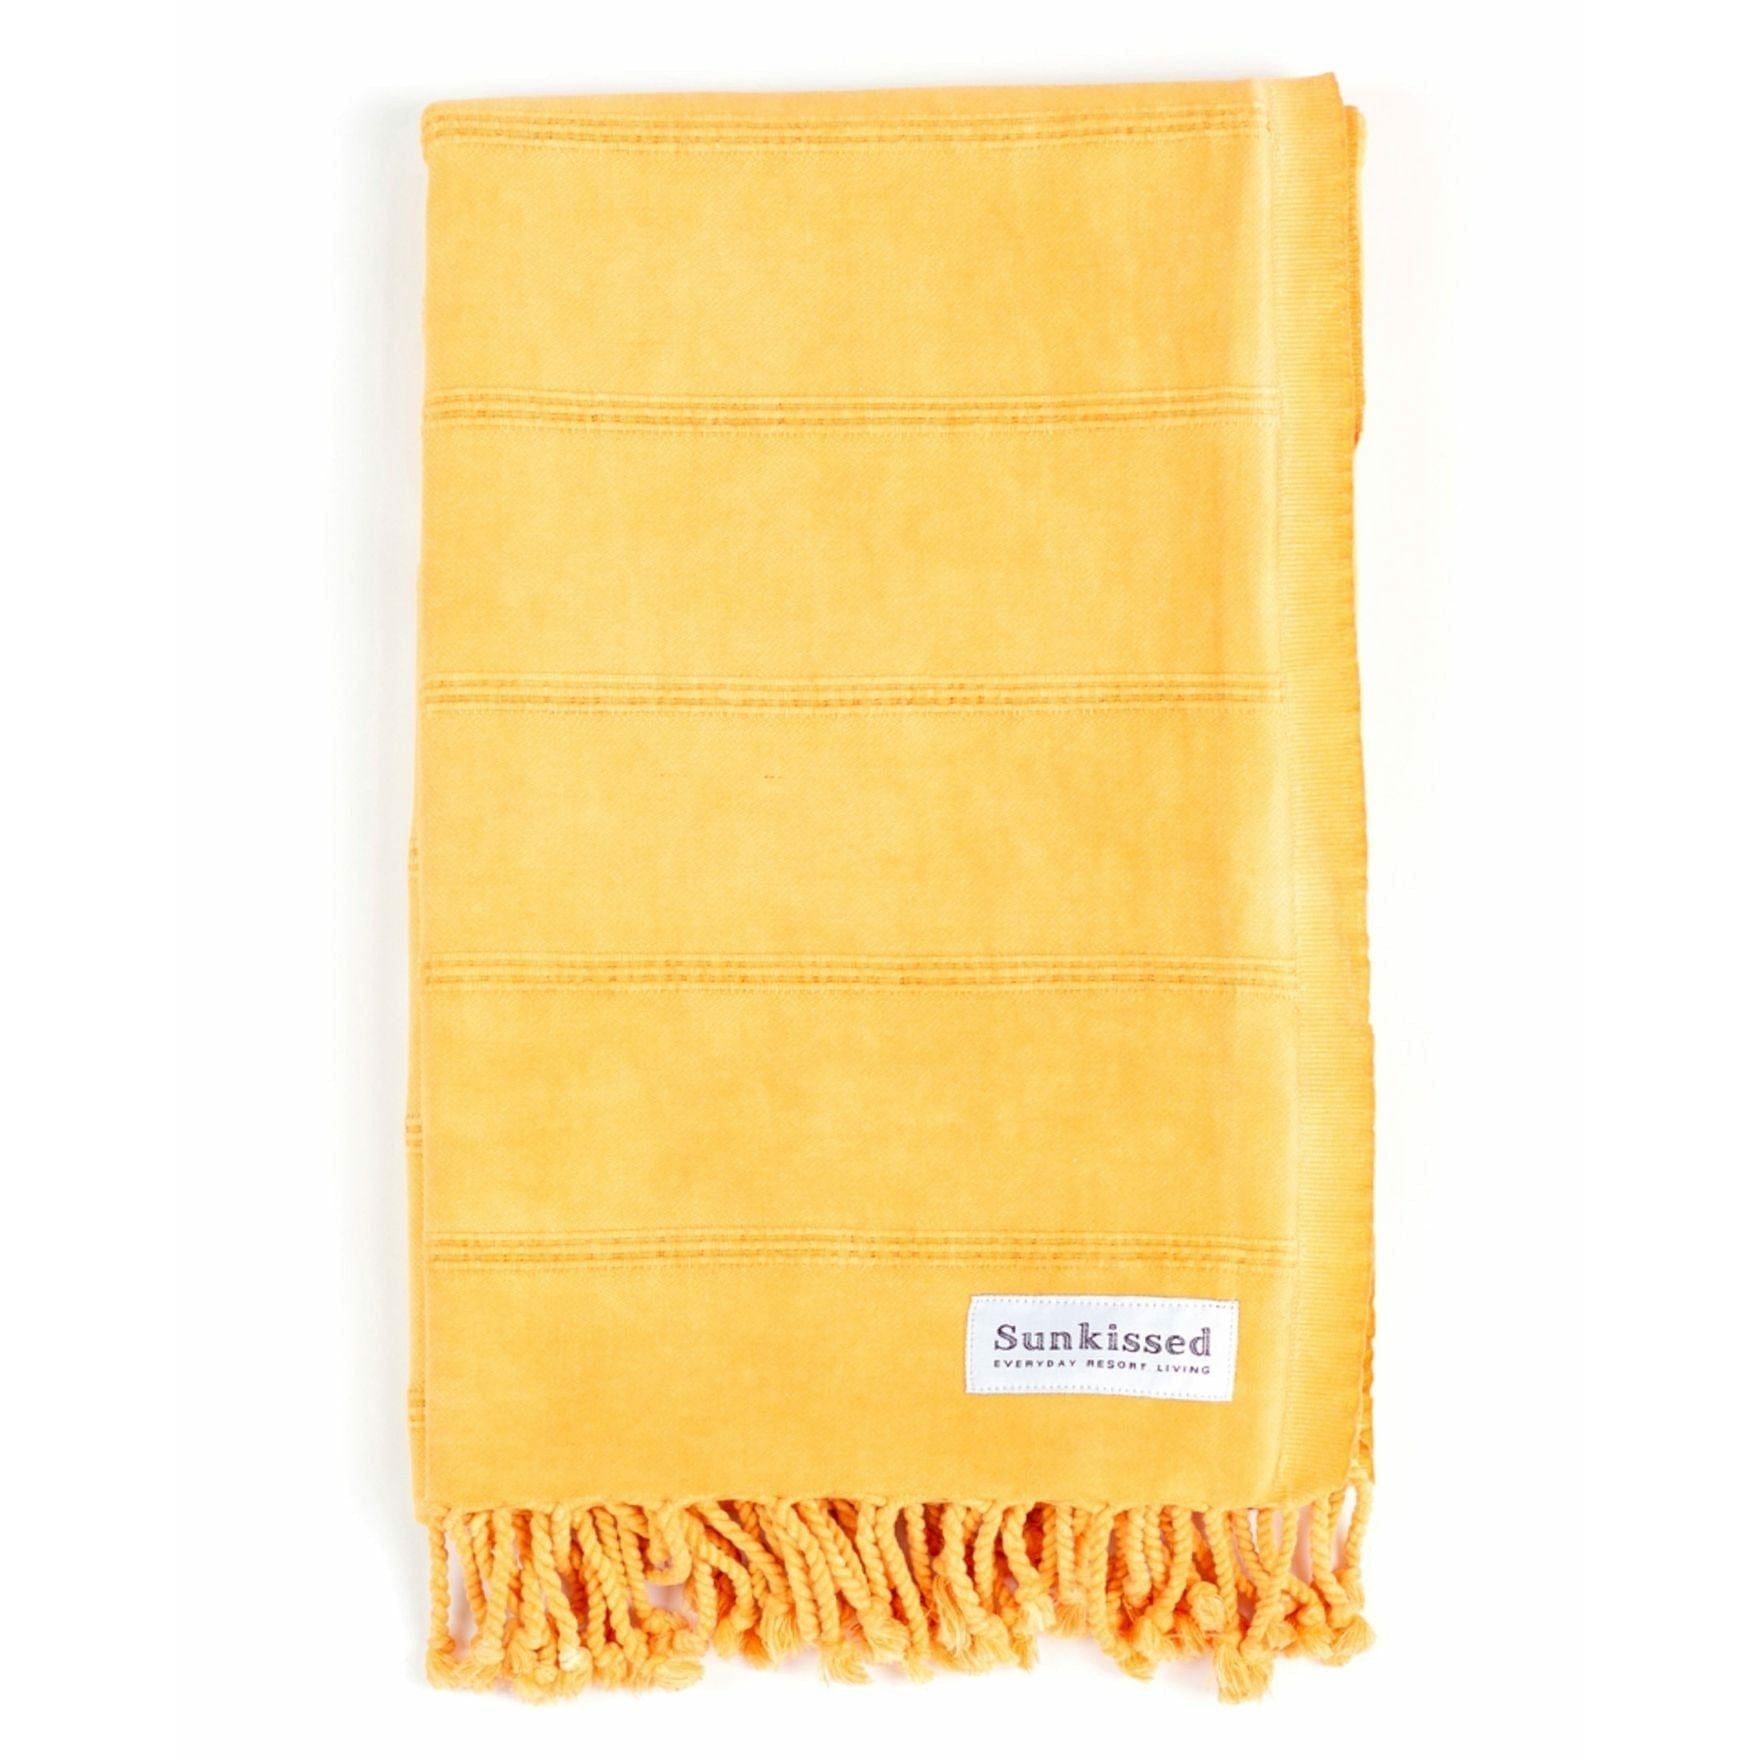 Sunkissed L • 100cm x 180cm • 40"W x 72"L / Yellow Tuscany • Sand Free Beach Towel by Sunkissed